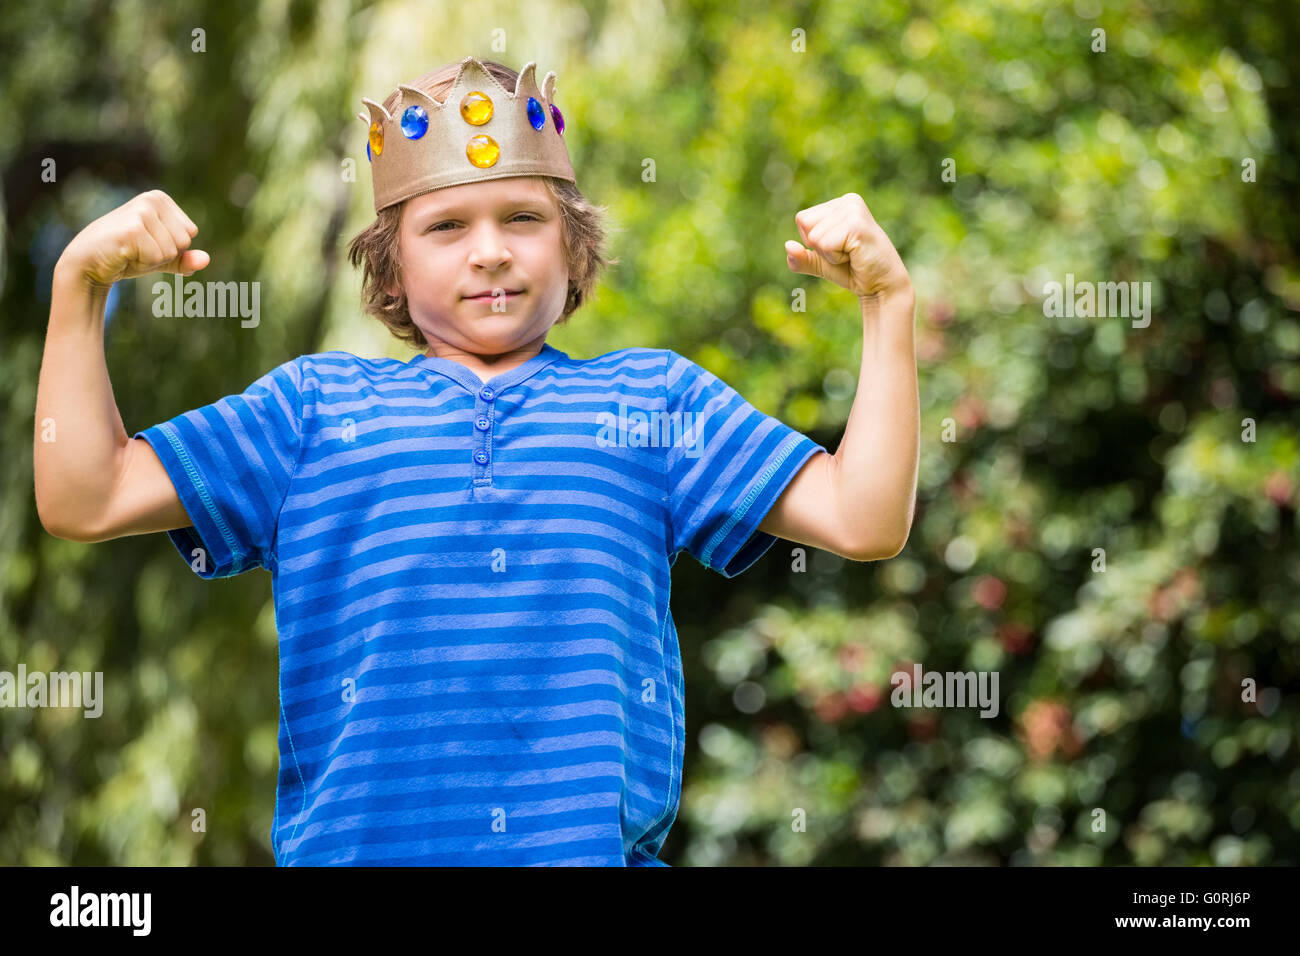 Cute boy with a crown showing his muscles Stock Photo